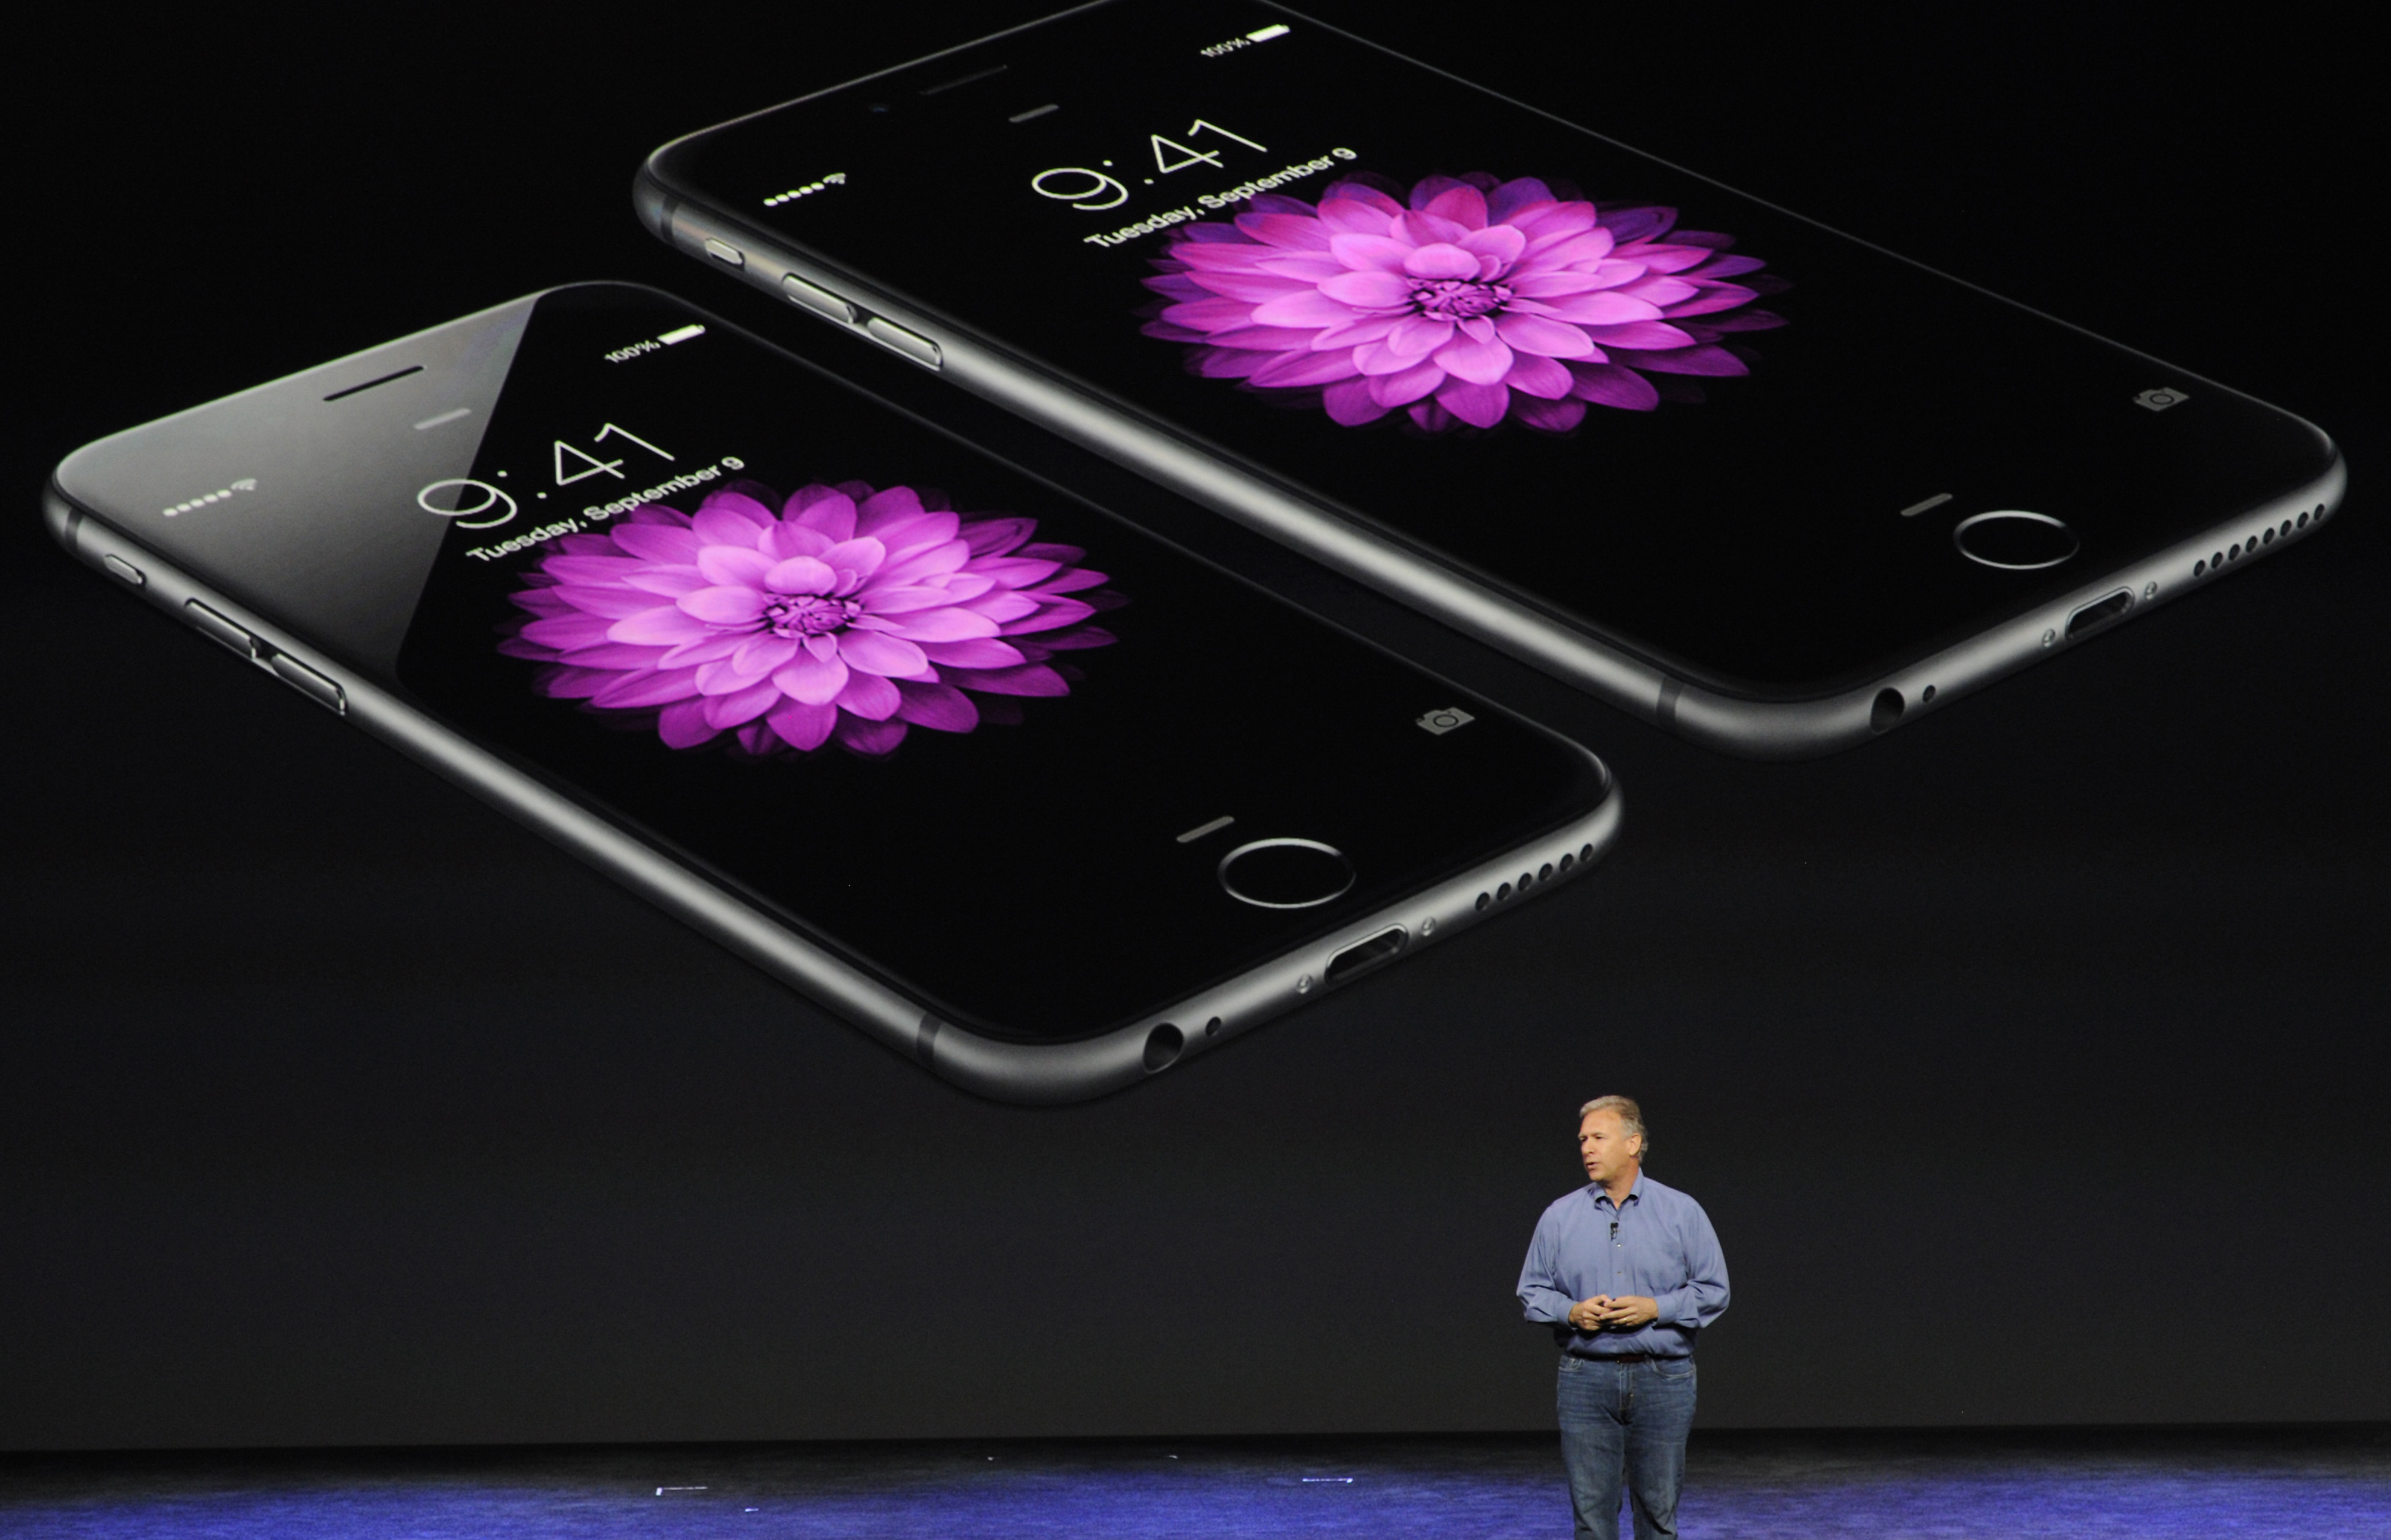 Philip "Phil" Schiller, senior vice president of worldwide marketing at Apple Inc., speaks about the iPhone 6 and iPhone 6 Plus during a product announcement at Flint Center in Cupertino, California, U.S., on Tuesday, Sept. 9, 2014. (Bloomberg—Bloomberg via Getty Images)